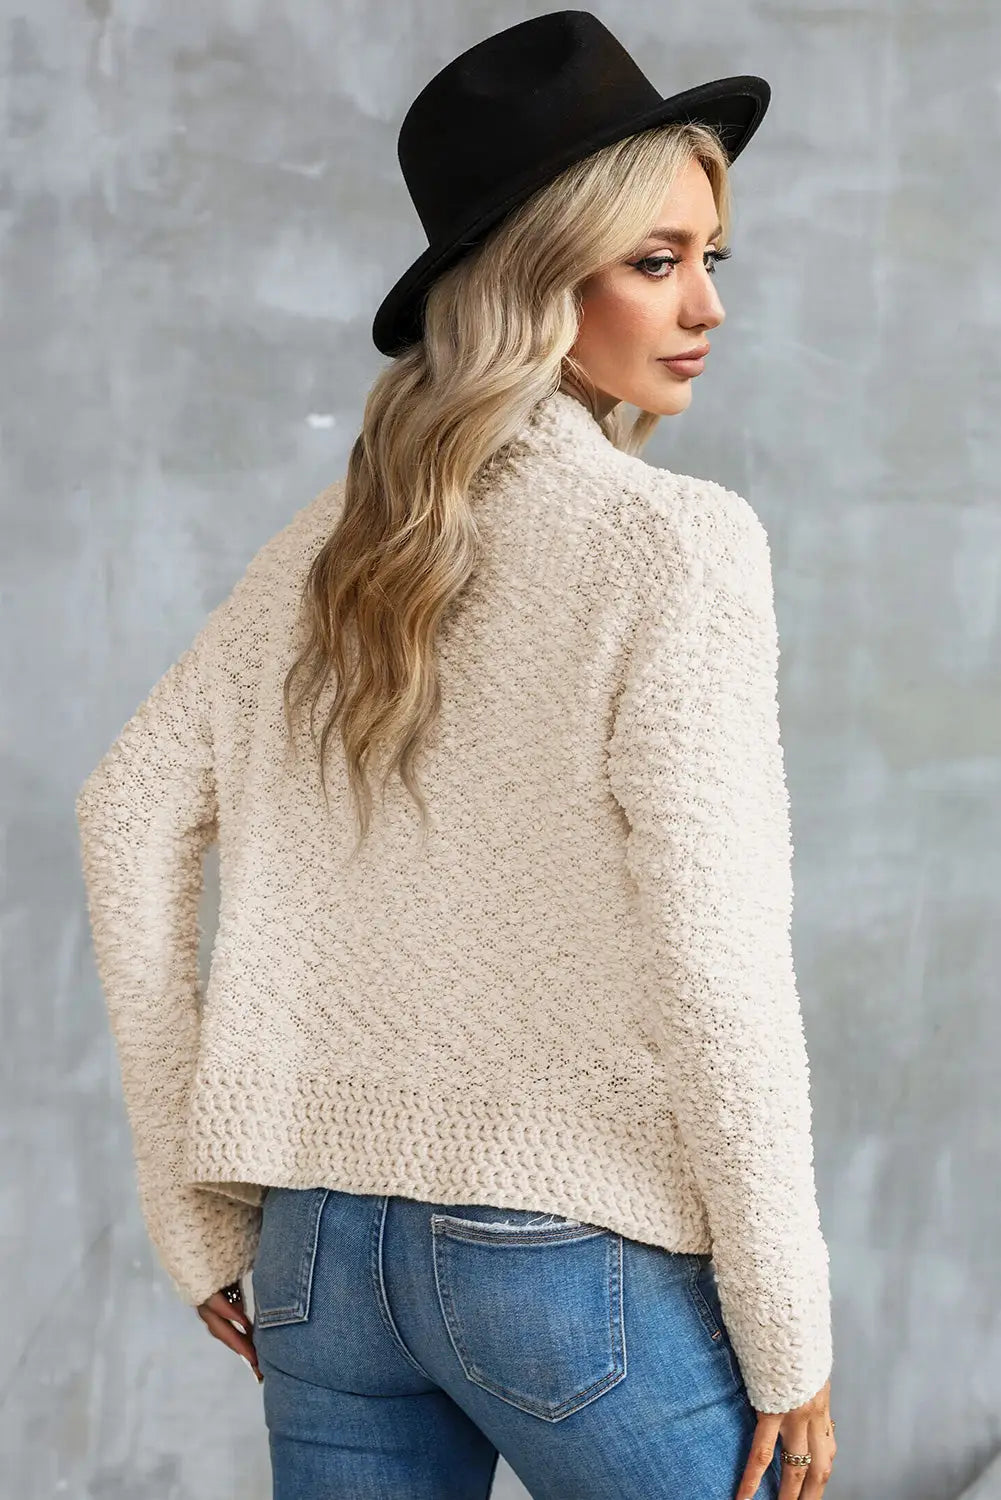 Apricot popcorn knit open front cardigan - tops